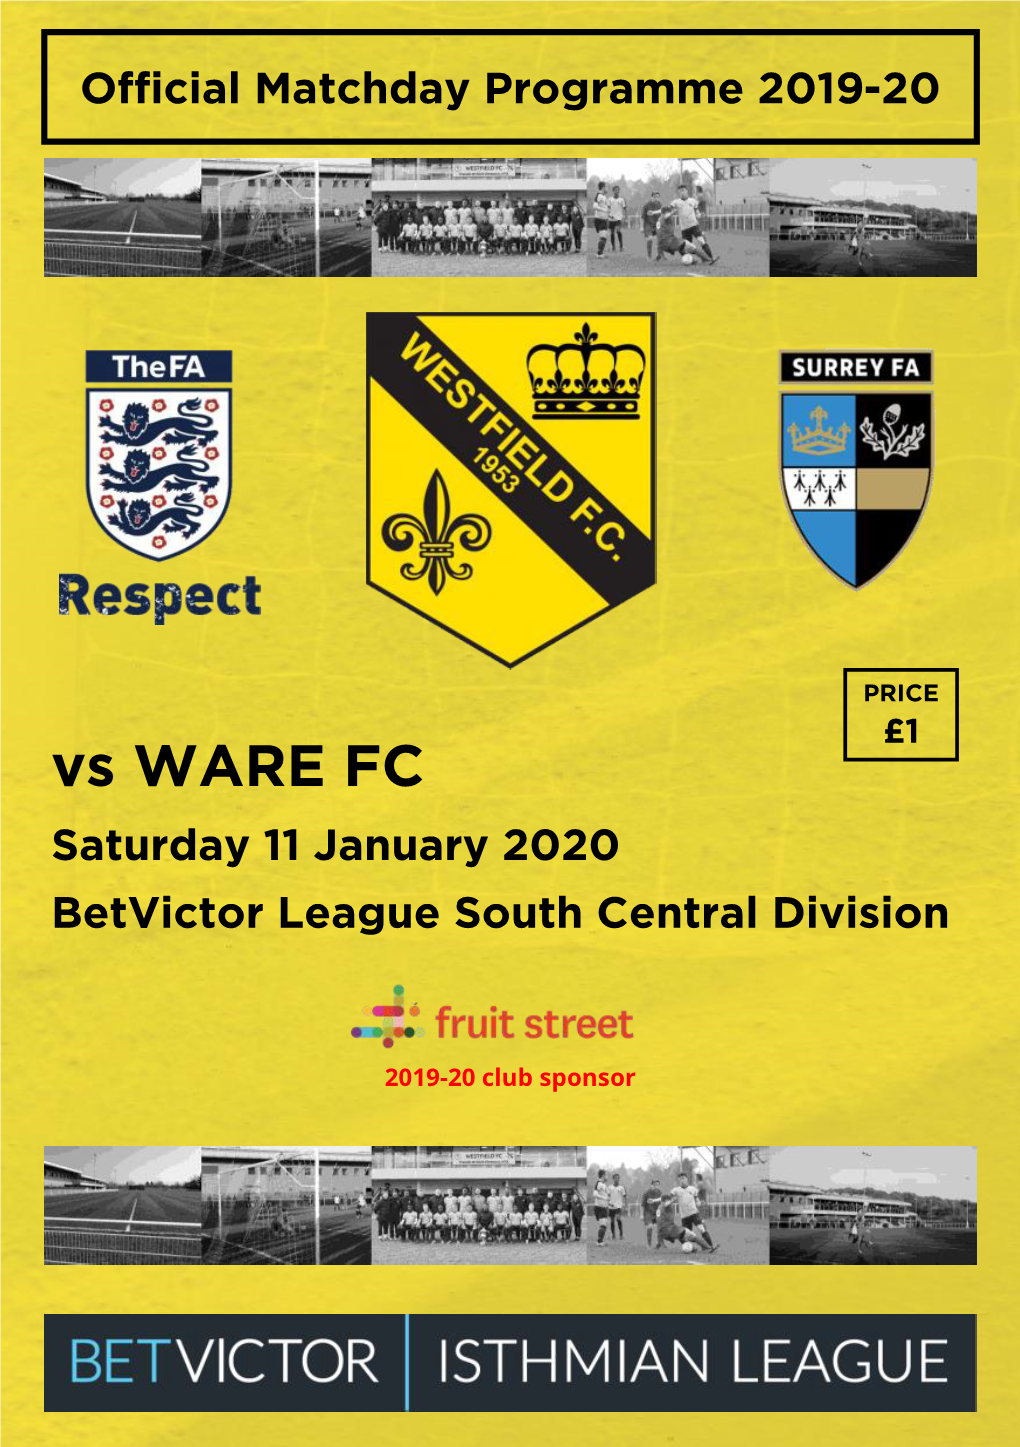 Vs WARE FC Saturday 11 January 2020 Betvictor League South Central Division